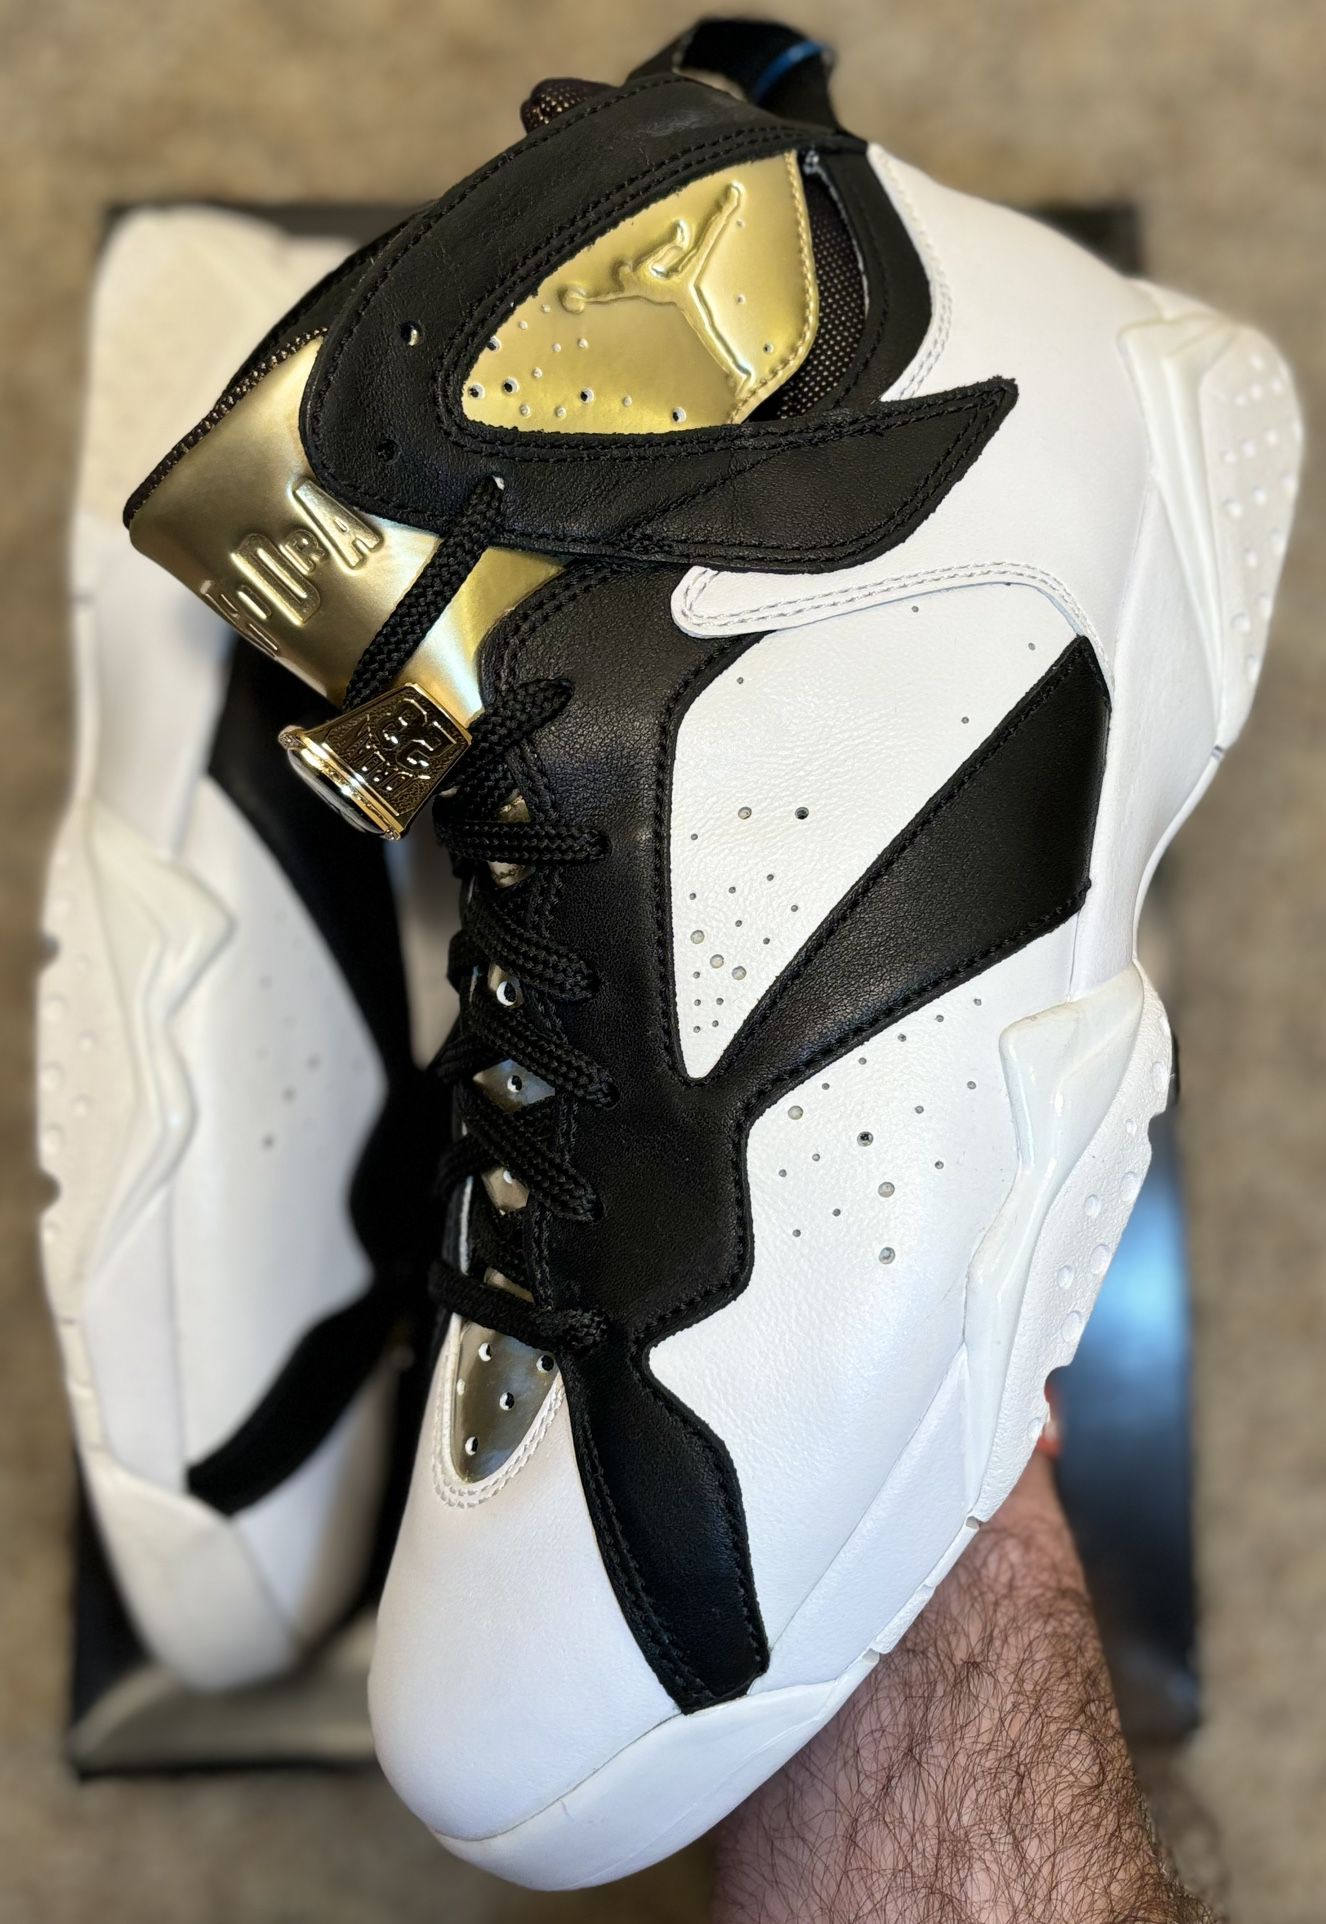 Air Jordan 7 Retro Champagne Pack 2015 Size 8.5 Brand New Without Box 